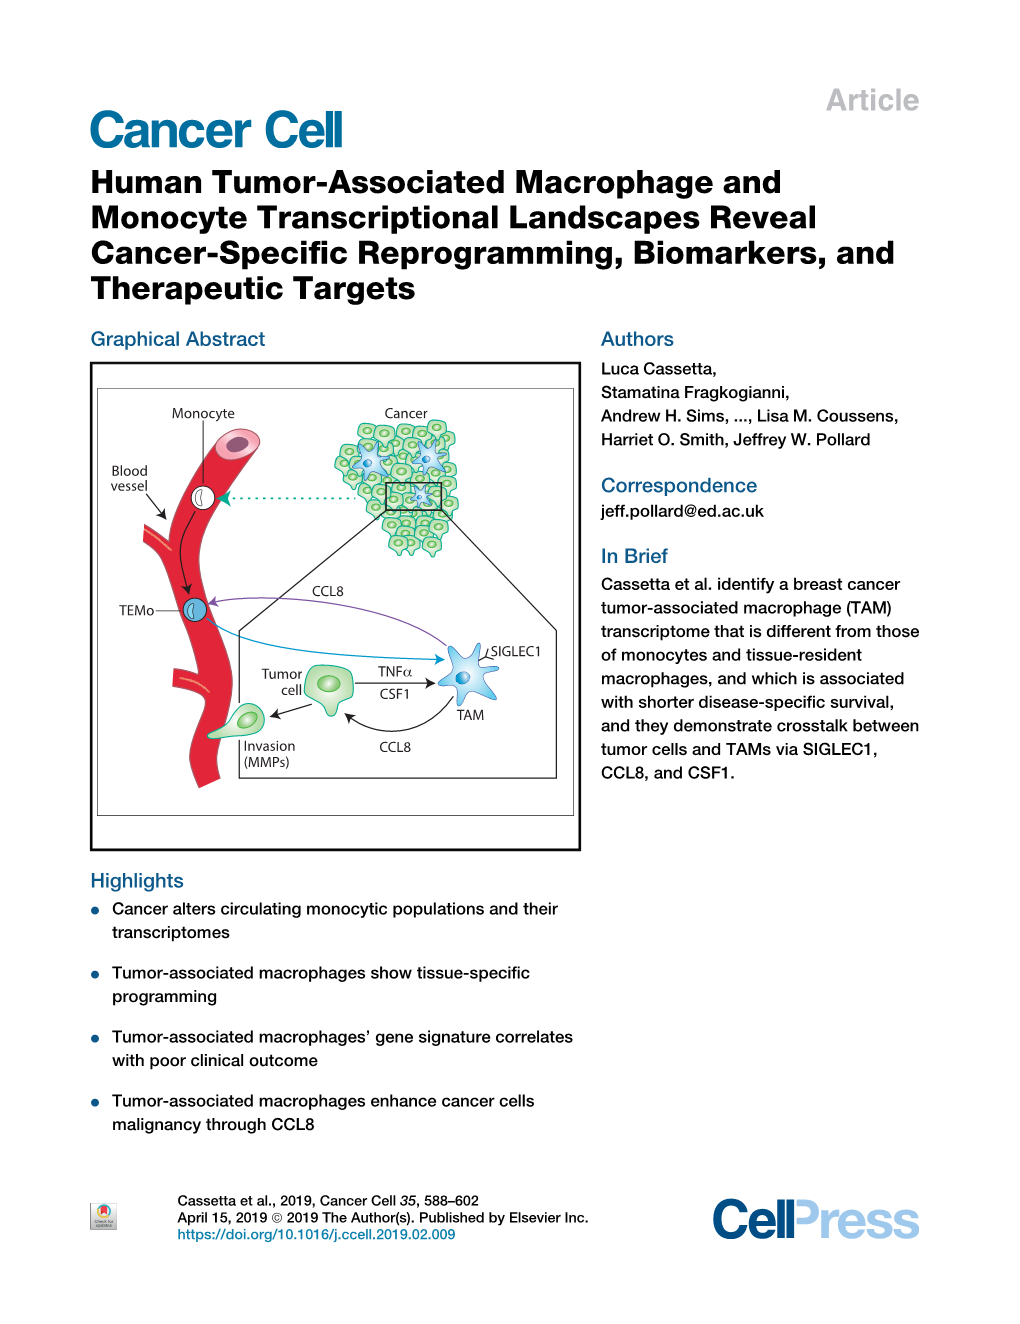 Human Tumor-Associated Macrophage and Monocyte Transcriptional Landscapes Reveal Cancer-Specific Reprogramming, Biomarkers